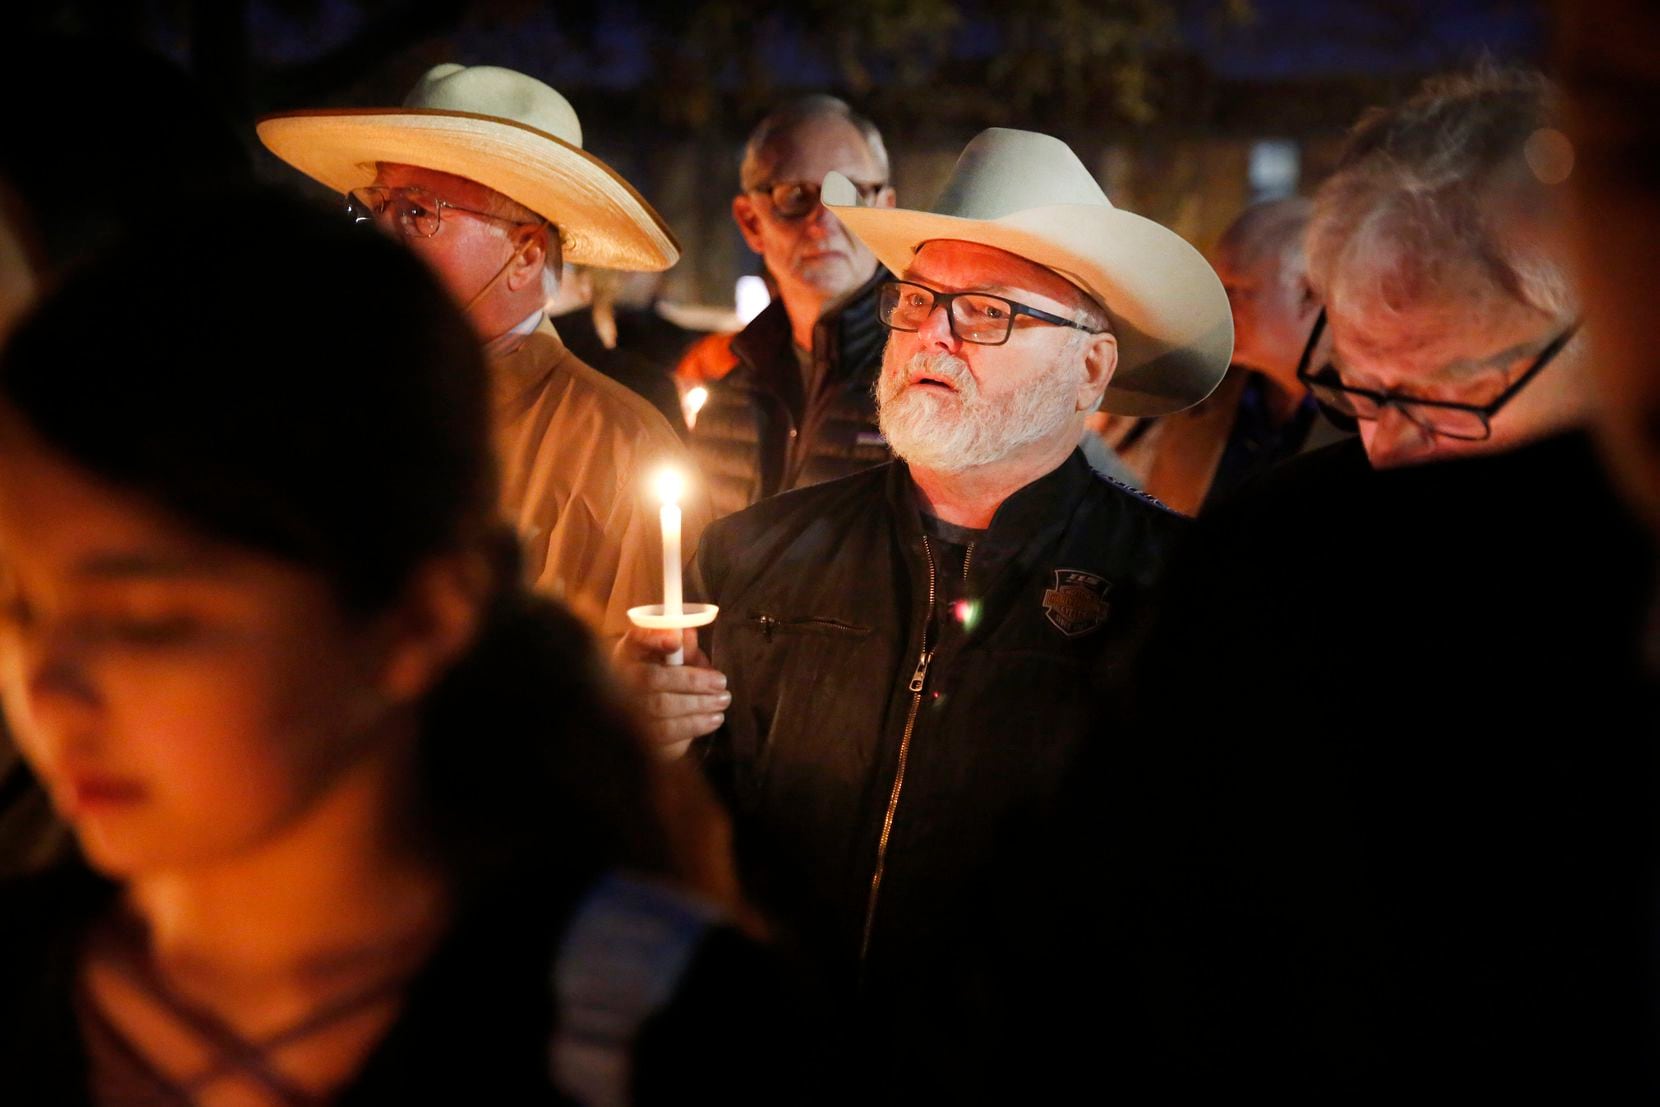 Stephen Willeford, the man who confronted and exchanged gunfire with the Sutherland Springs church shooter in 2017 (center) joined church and community members gathered outside the West Freeway Church of Christ in Fort Worth for a candlelight vigil Monday evening.